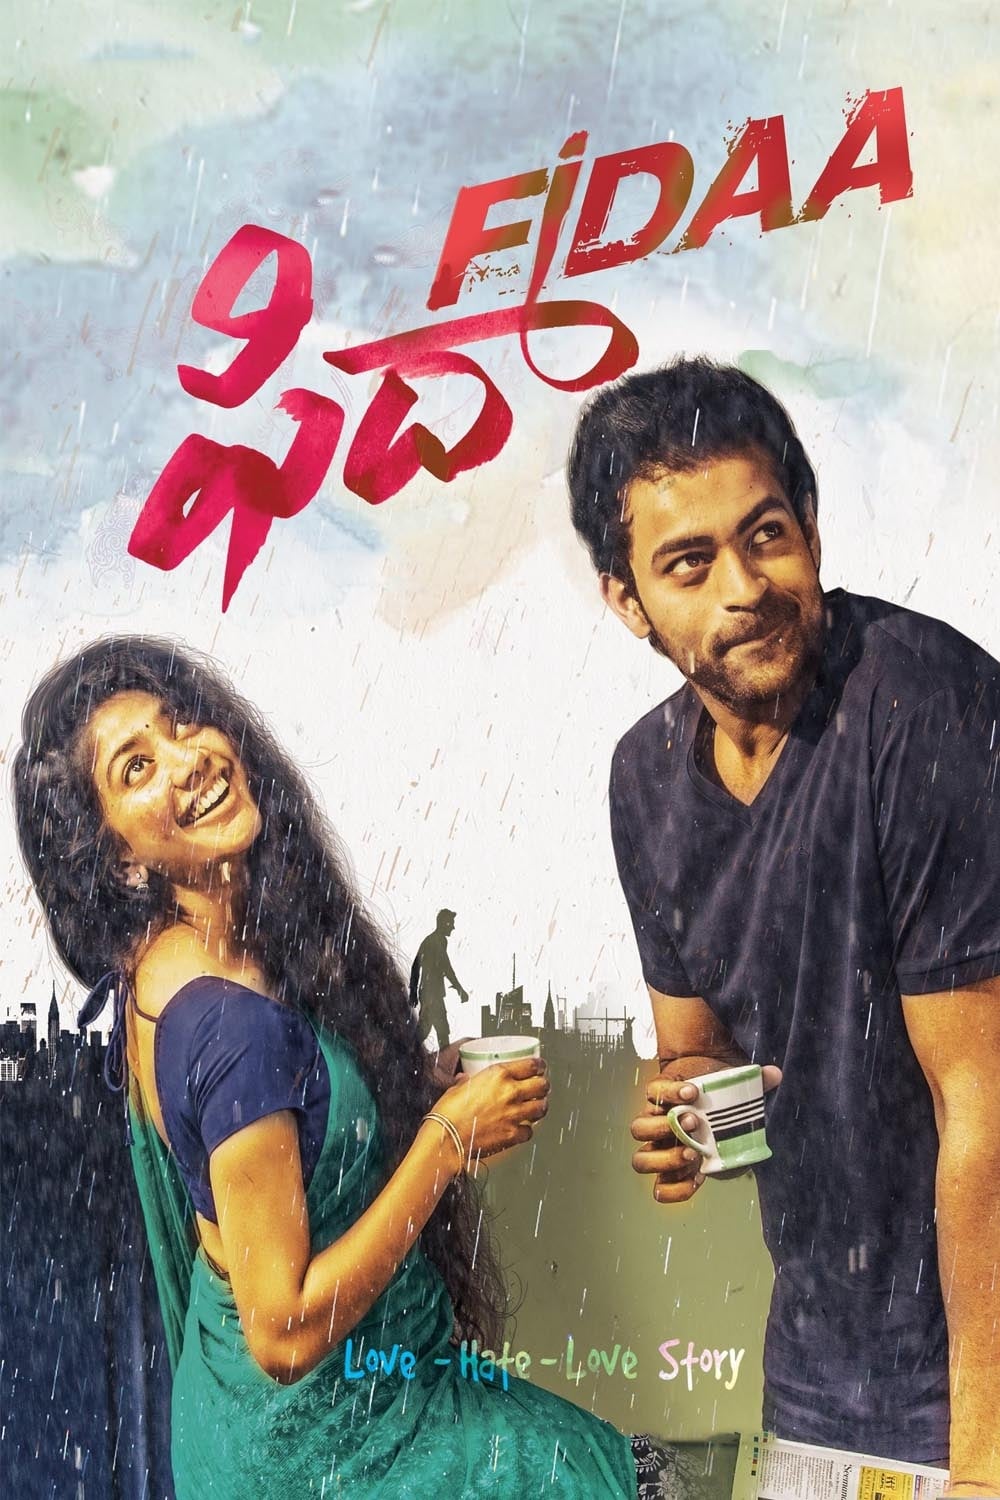 Poster for the movie "Fidaa"